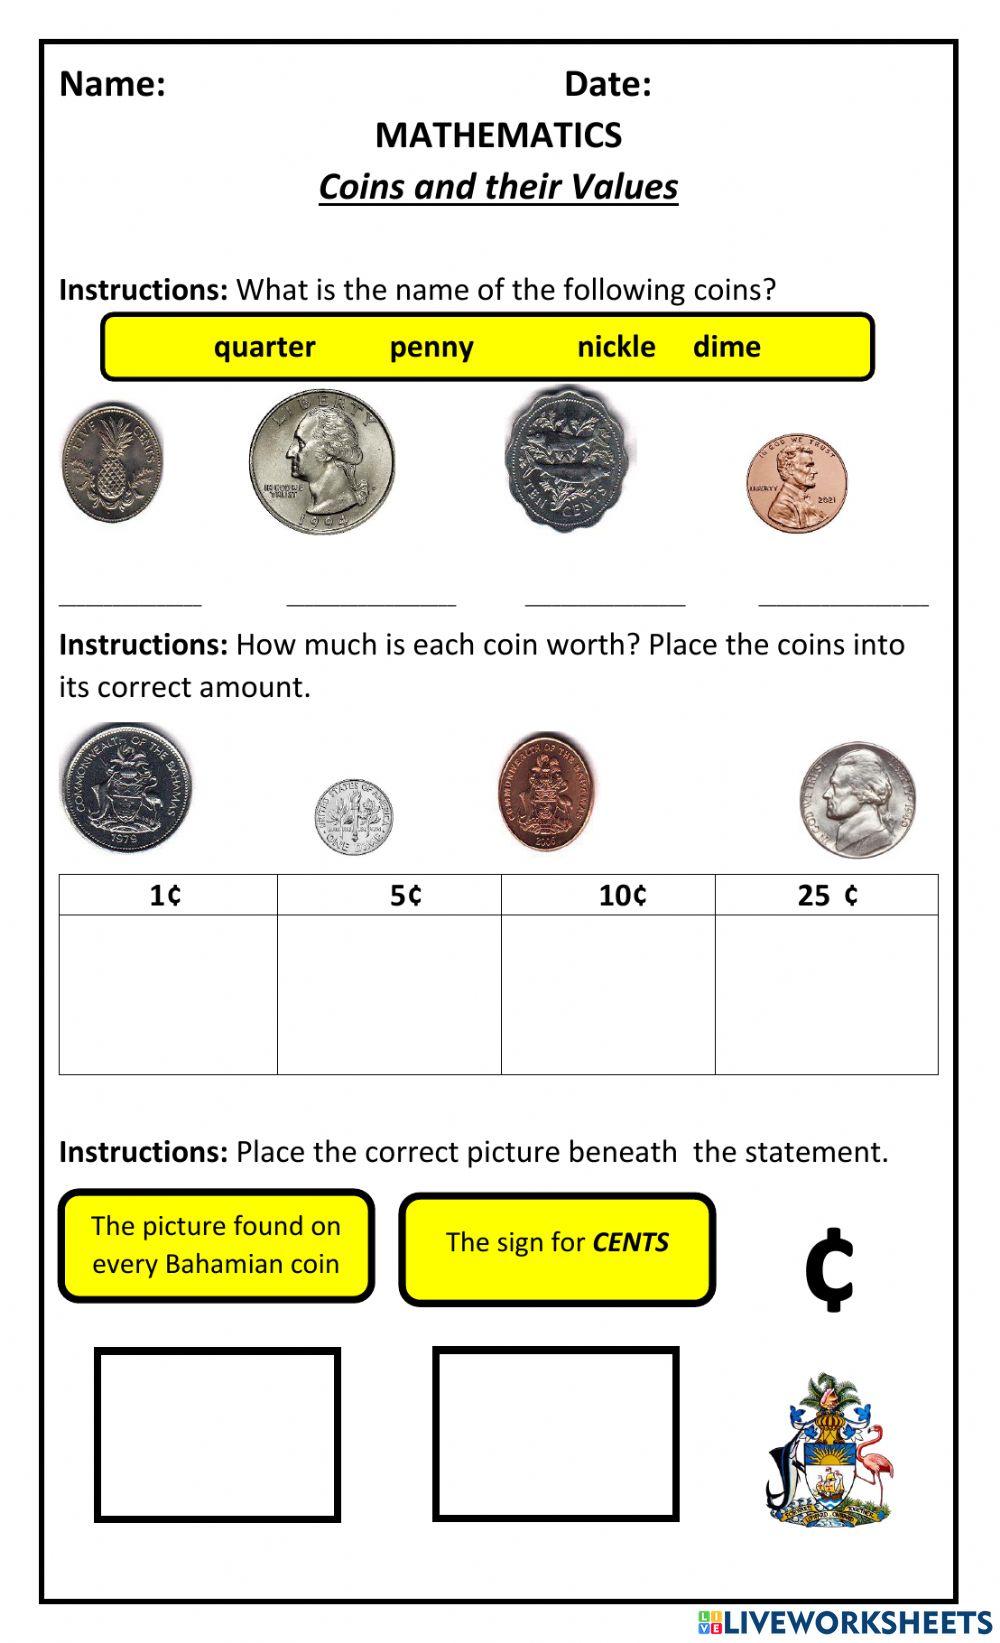 Coins and their Values